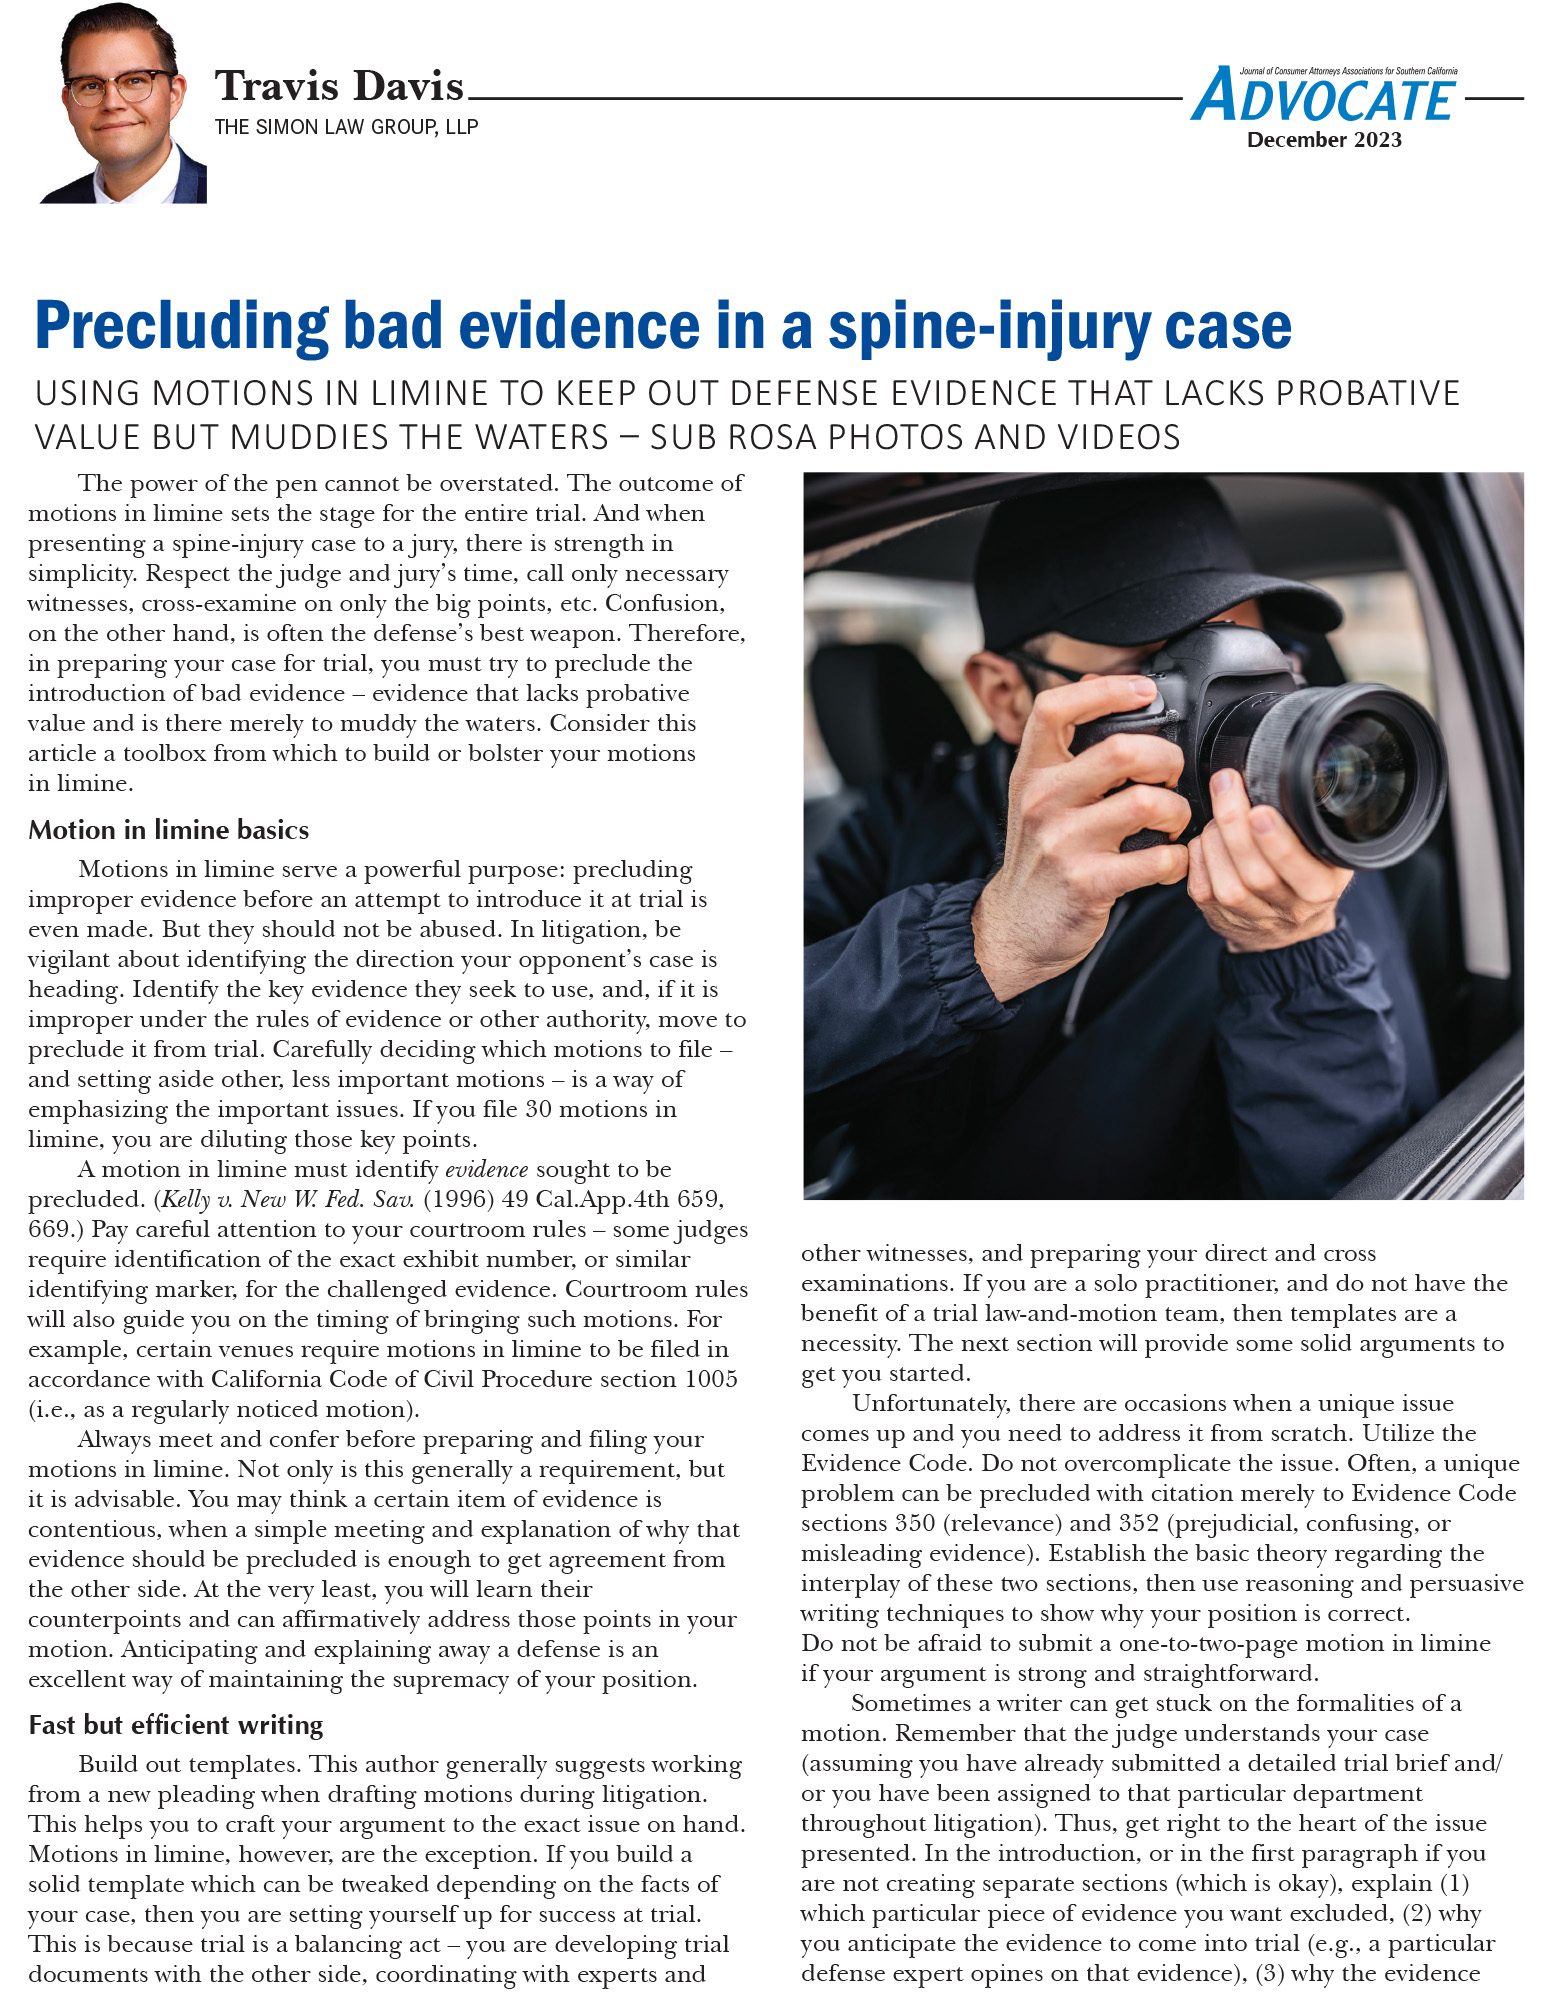 Precluding bad evidence in a spine-injury case page 1